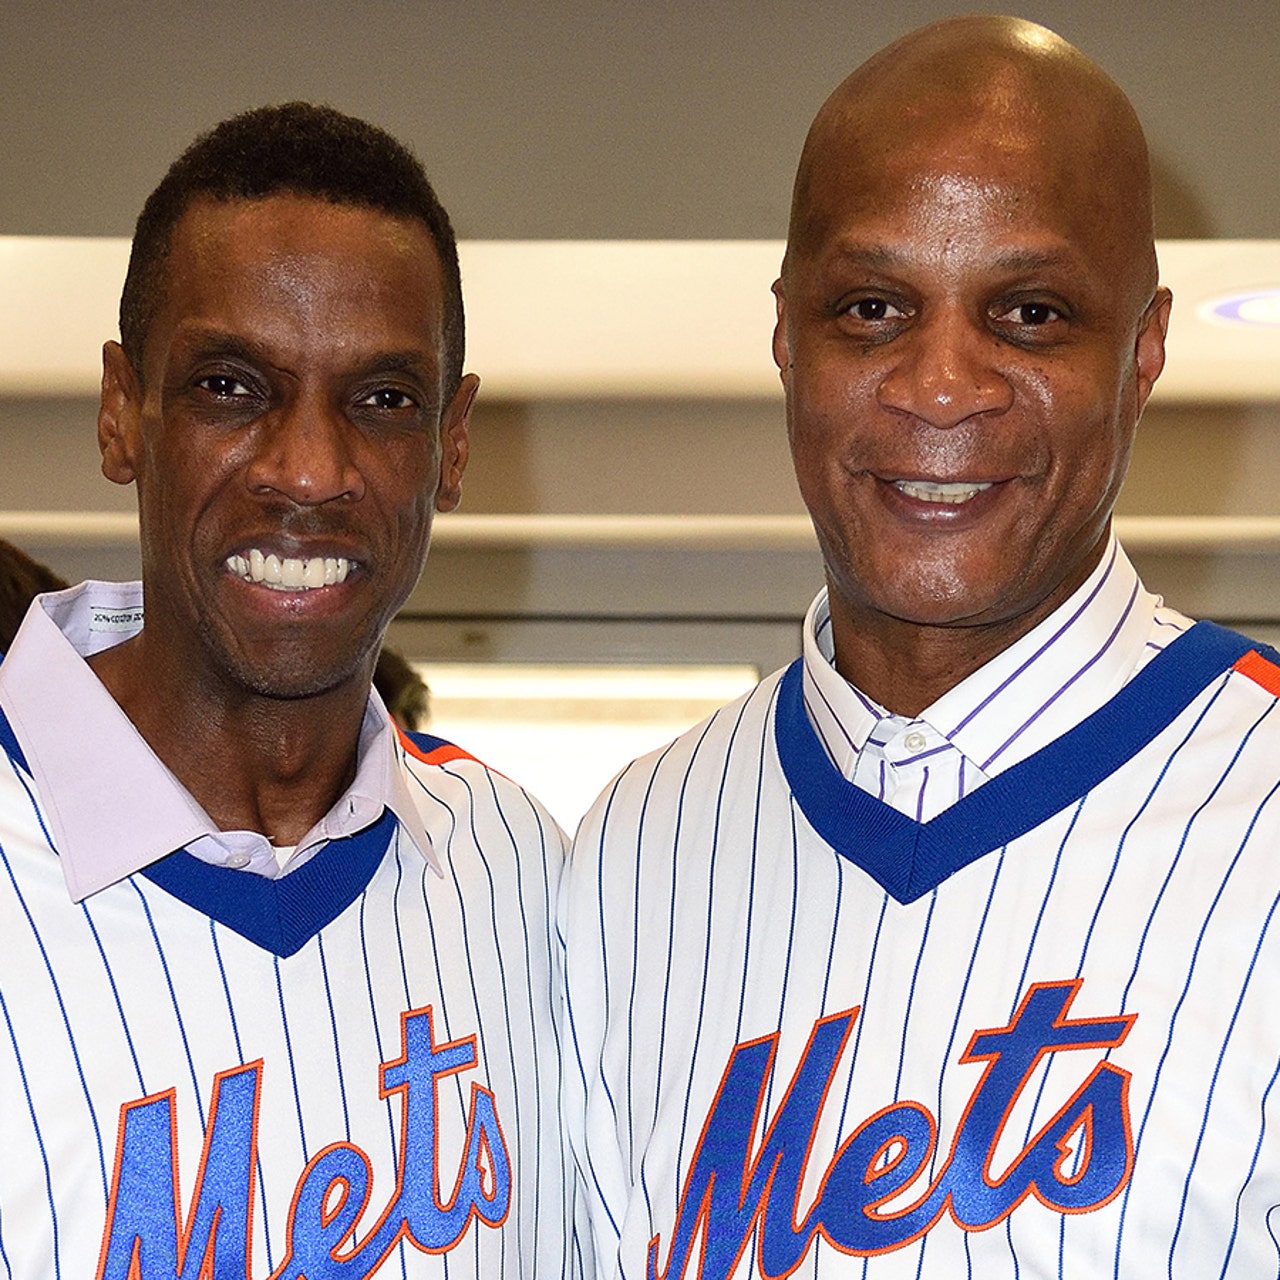 Doc Gooden ends friendship with Darryl Strawberry after drug accusations